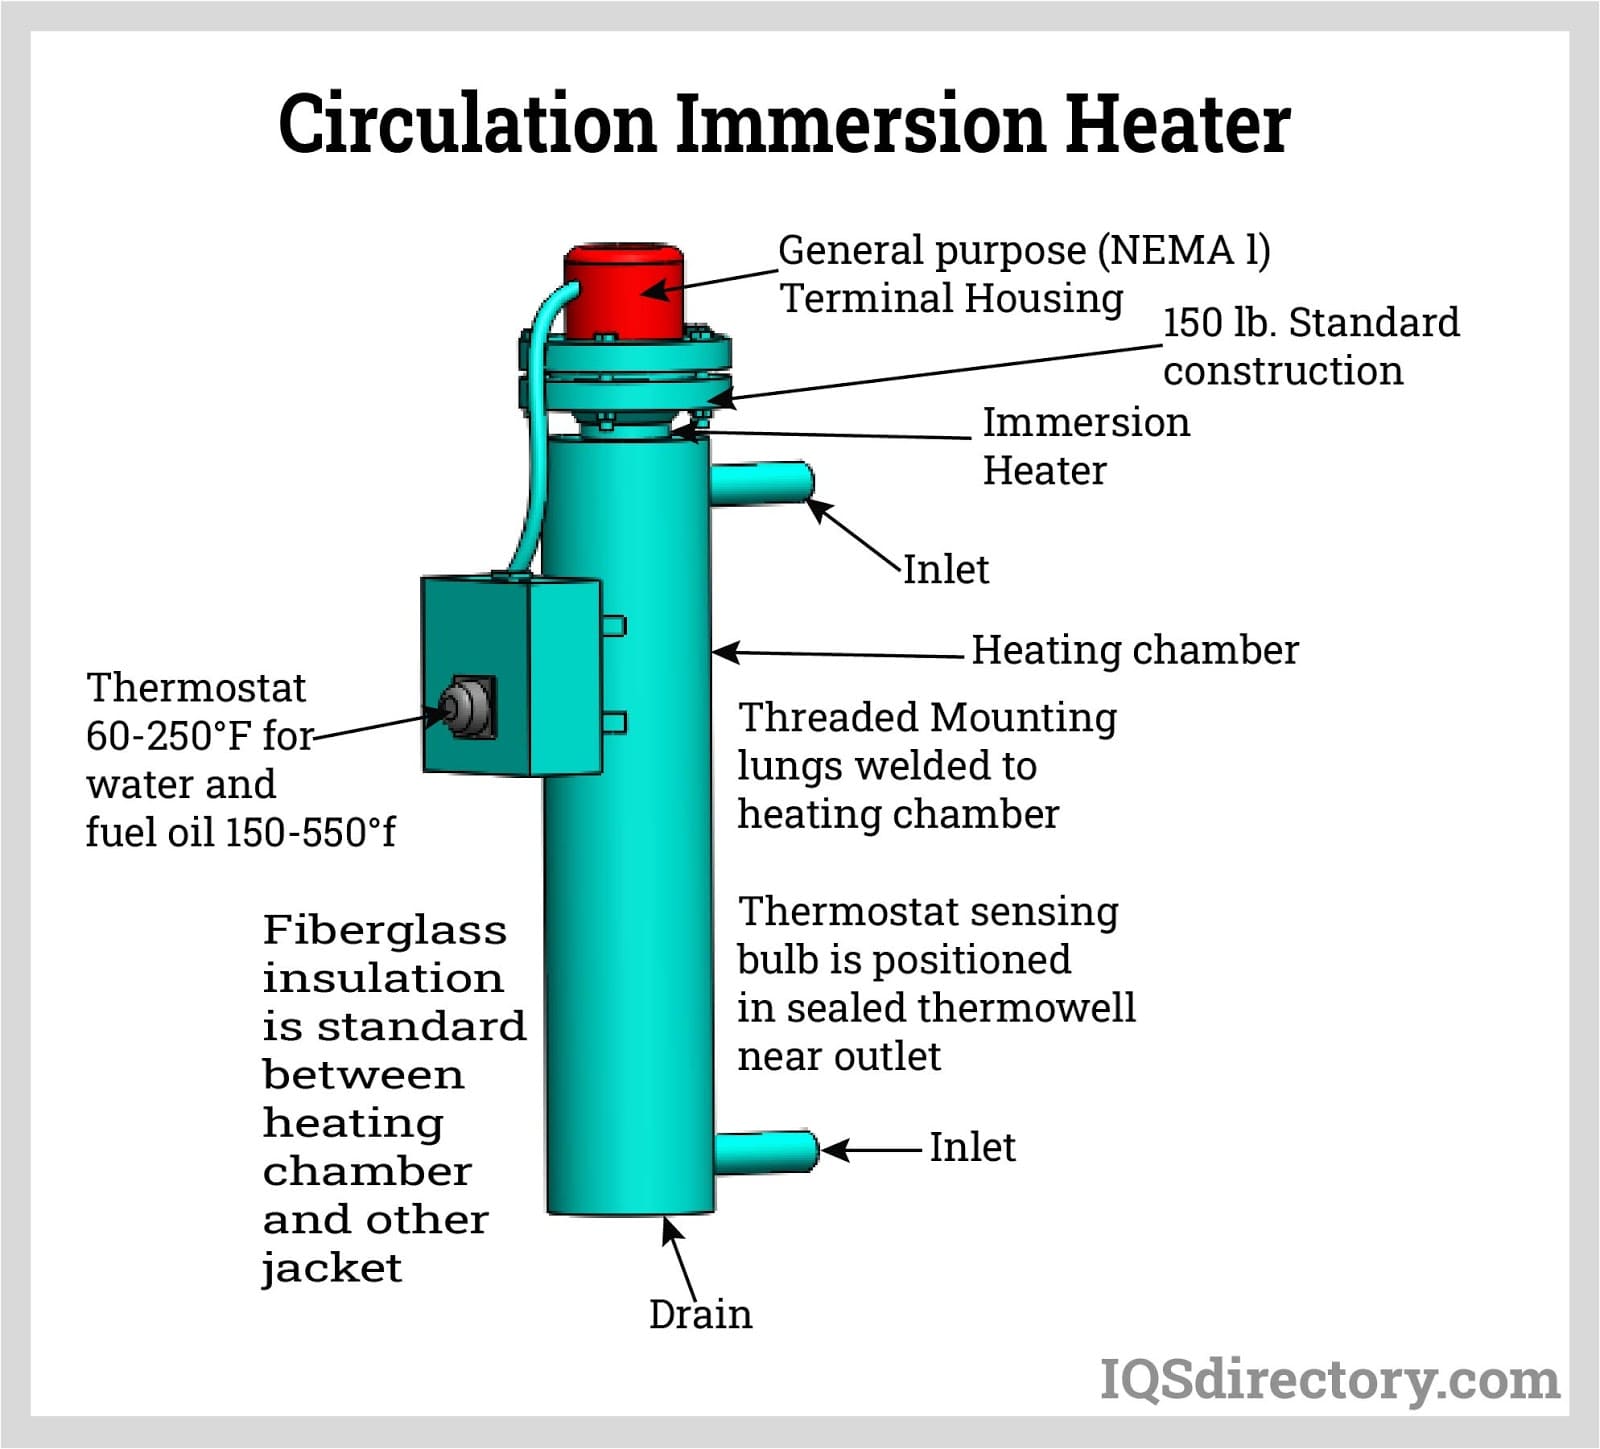 Circulation Immersion Heater